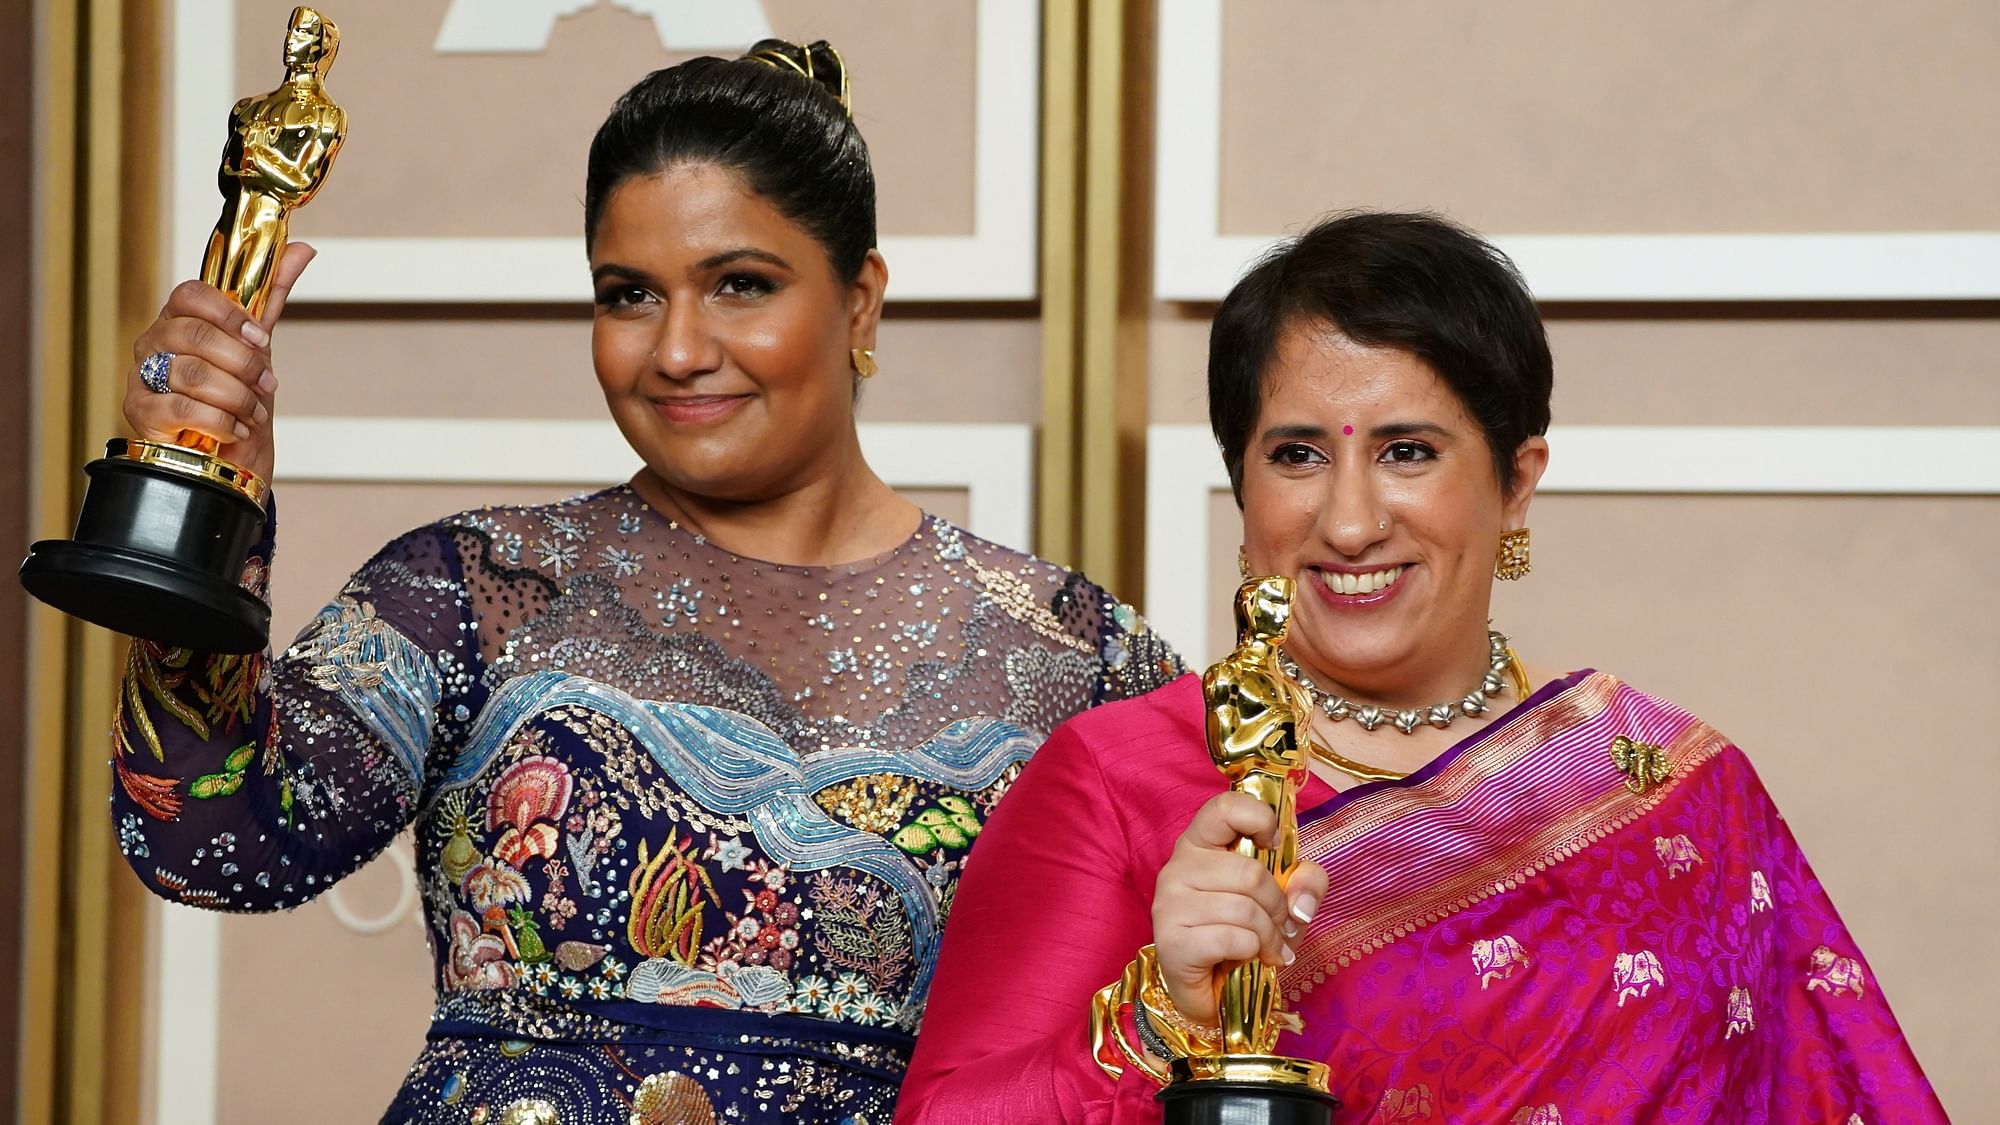 <div class="paragraphs"><p>Kartiki Gonsalves, left, and Guneet Monga pose with the award for best documentary short film for "The Elephant Whisperer" in the press room at the Oscars on Sunday, 12 March, at the Dolby Theatre in Los Angeles. </p></div>